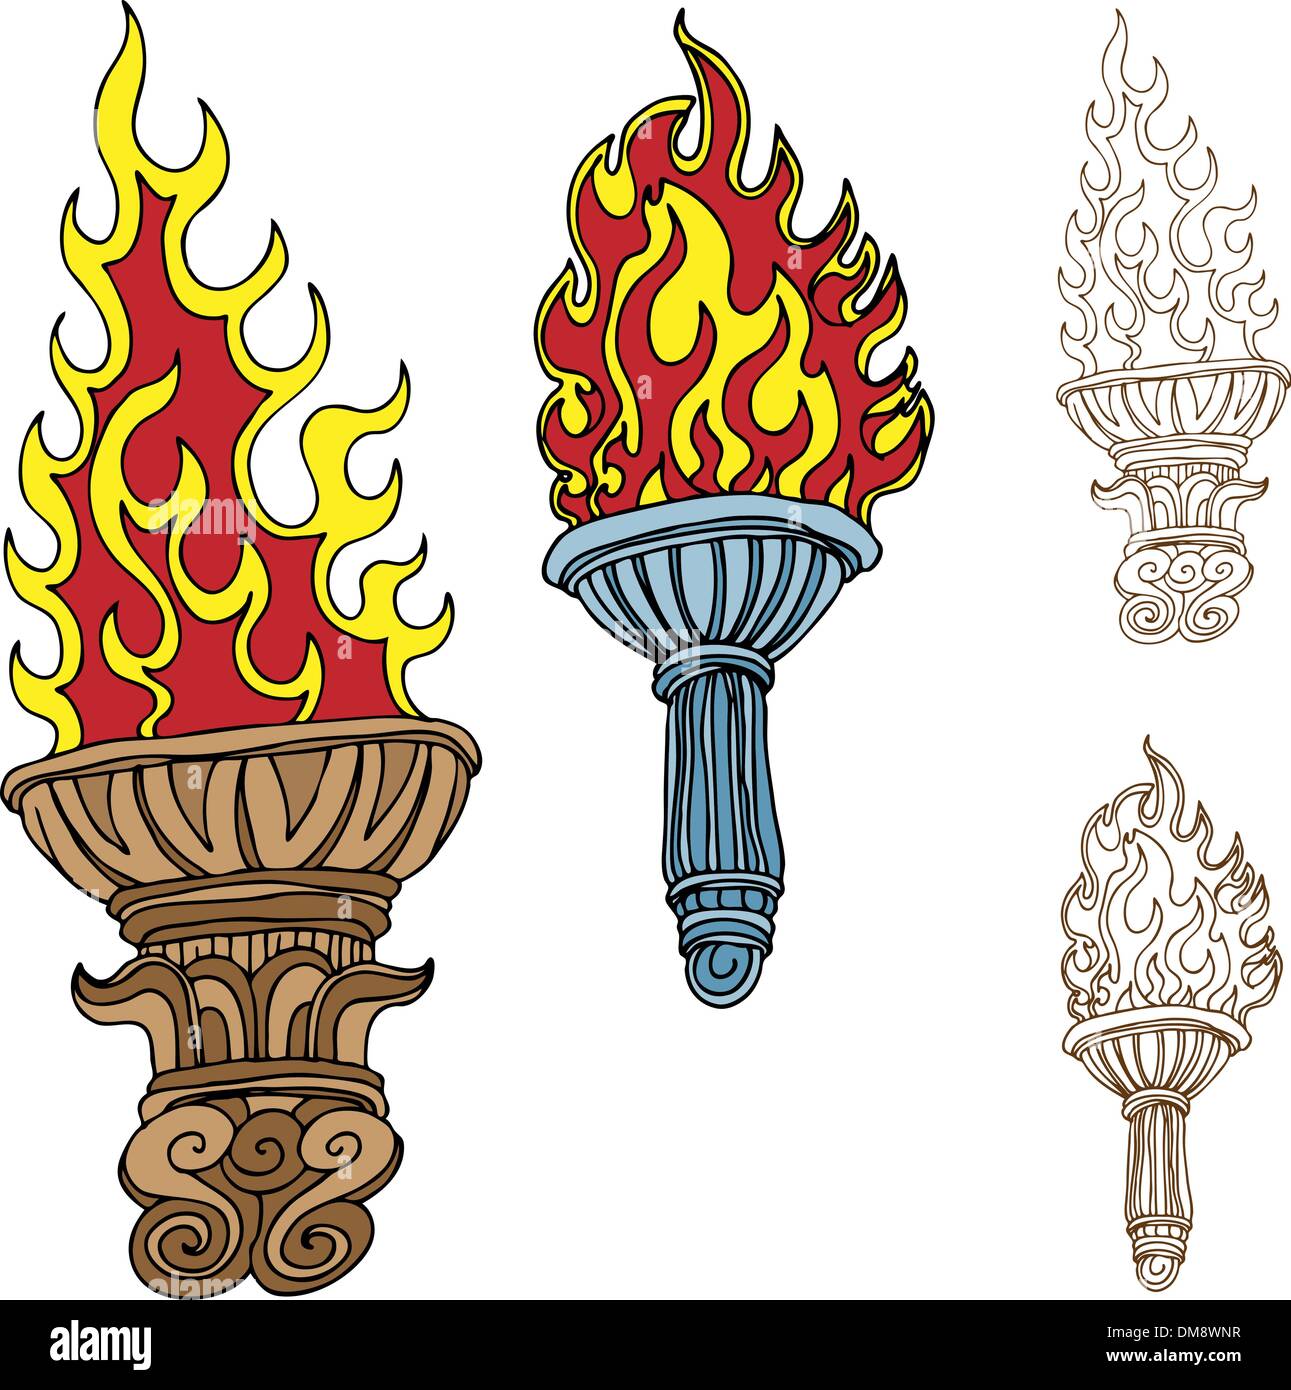 Torch Drawings Stock Vector